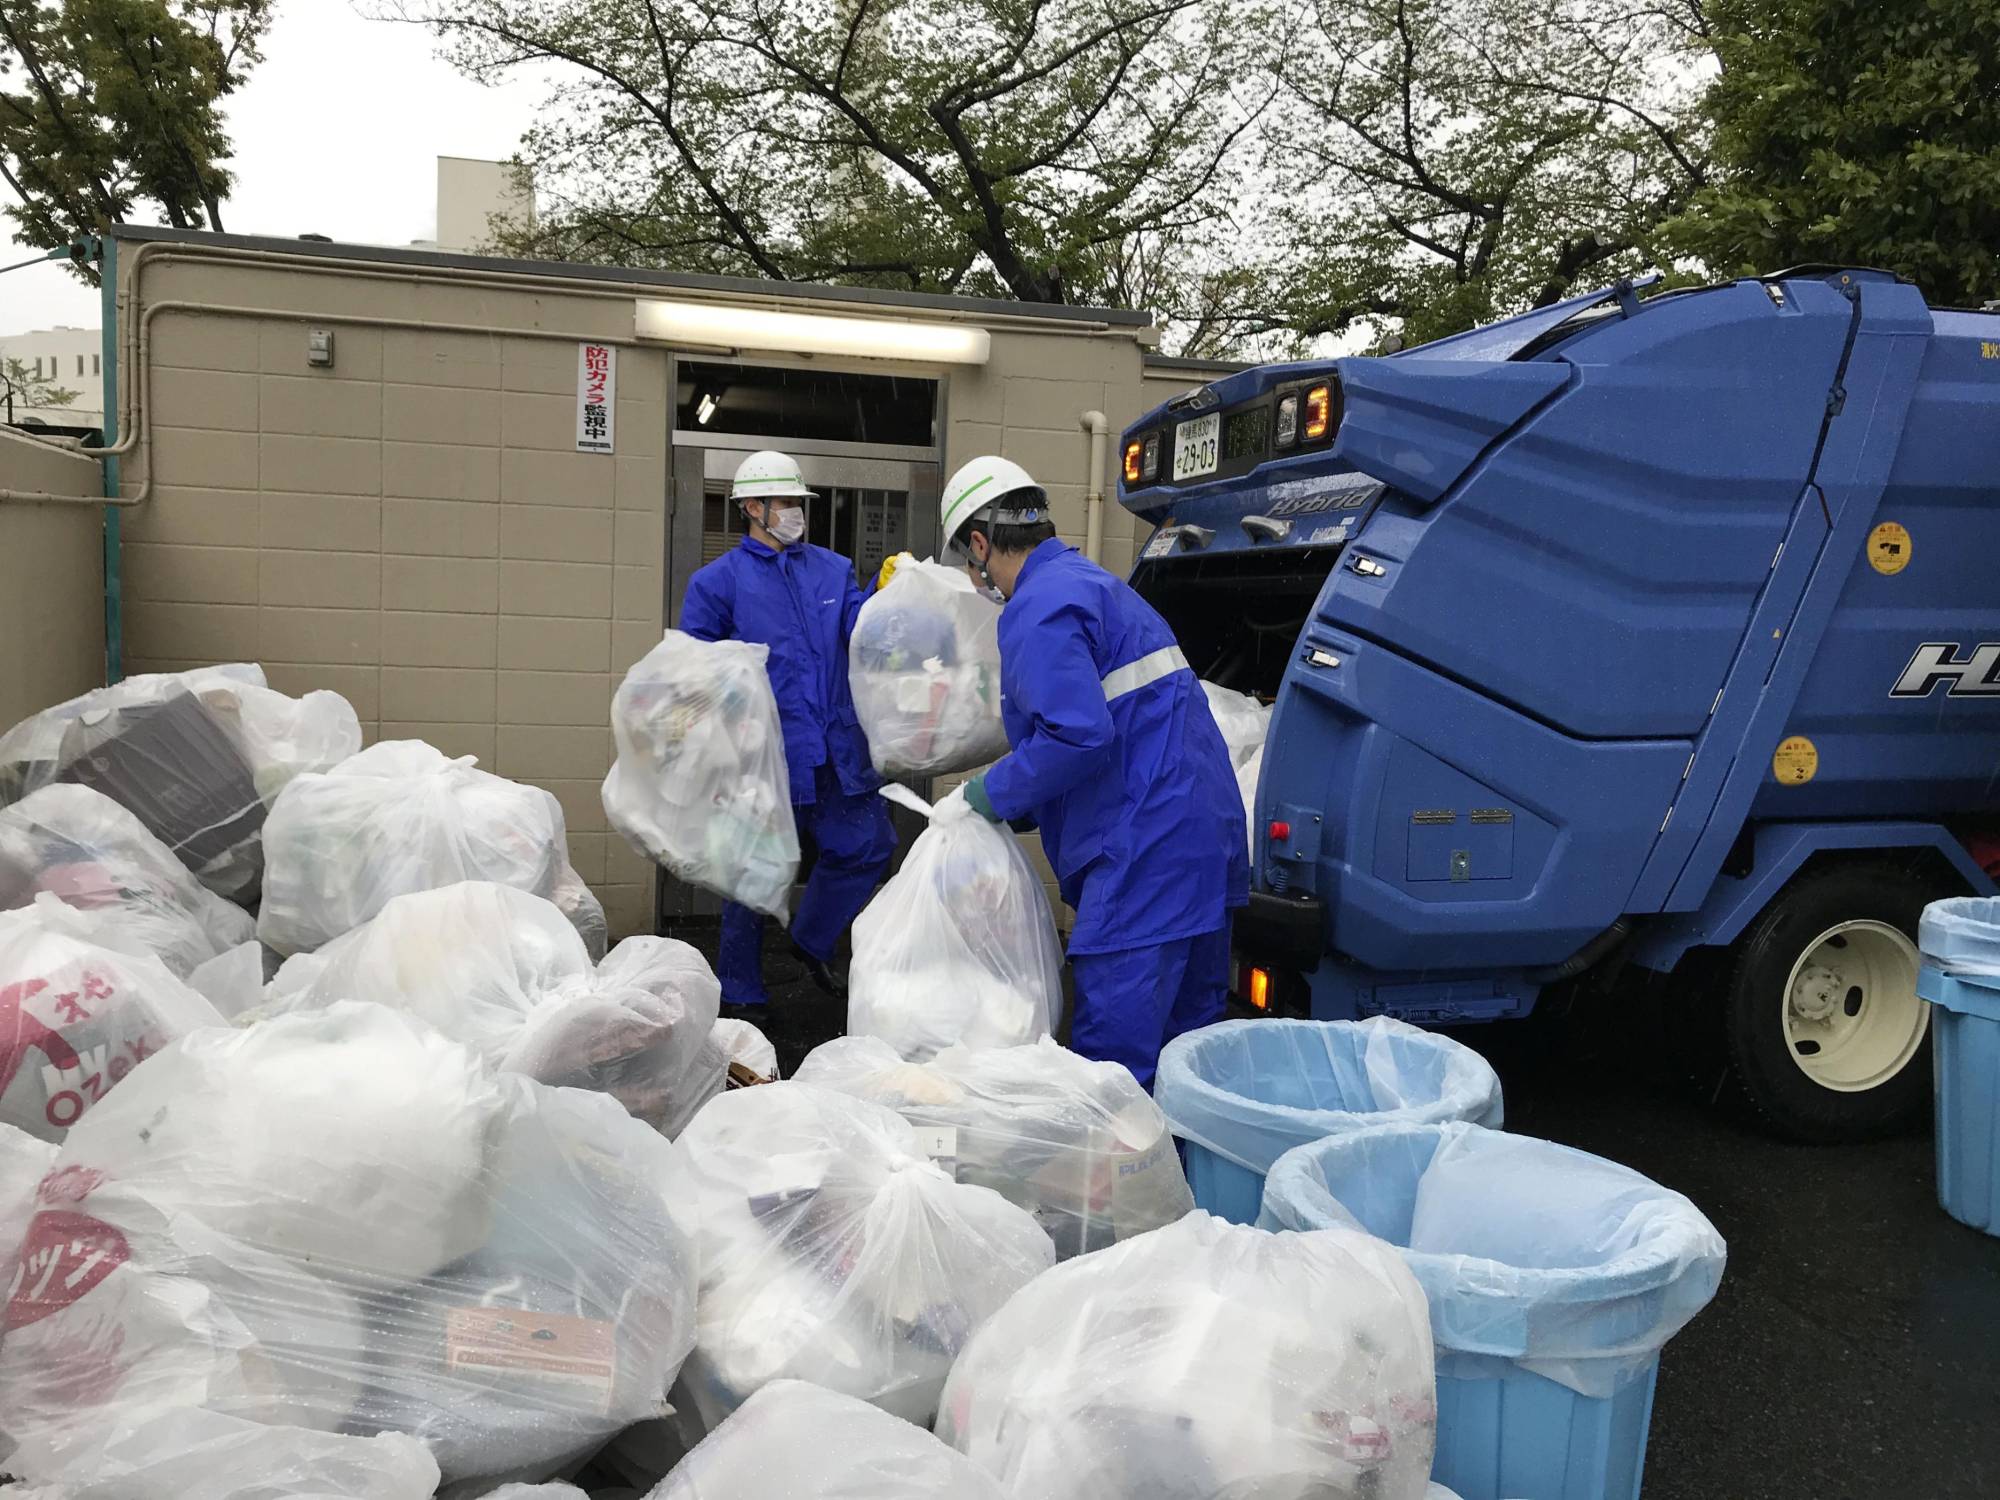 Workers pick up bags of waste in Tokyo on April 18.  | SEIICHIRO FUJII / VIA KYODO